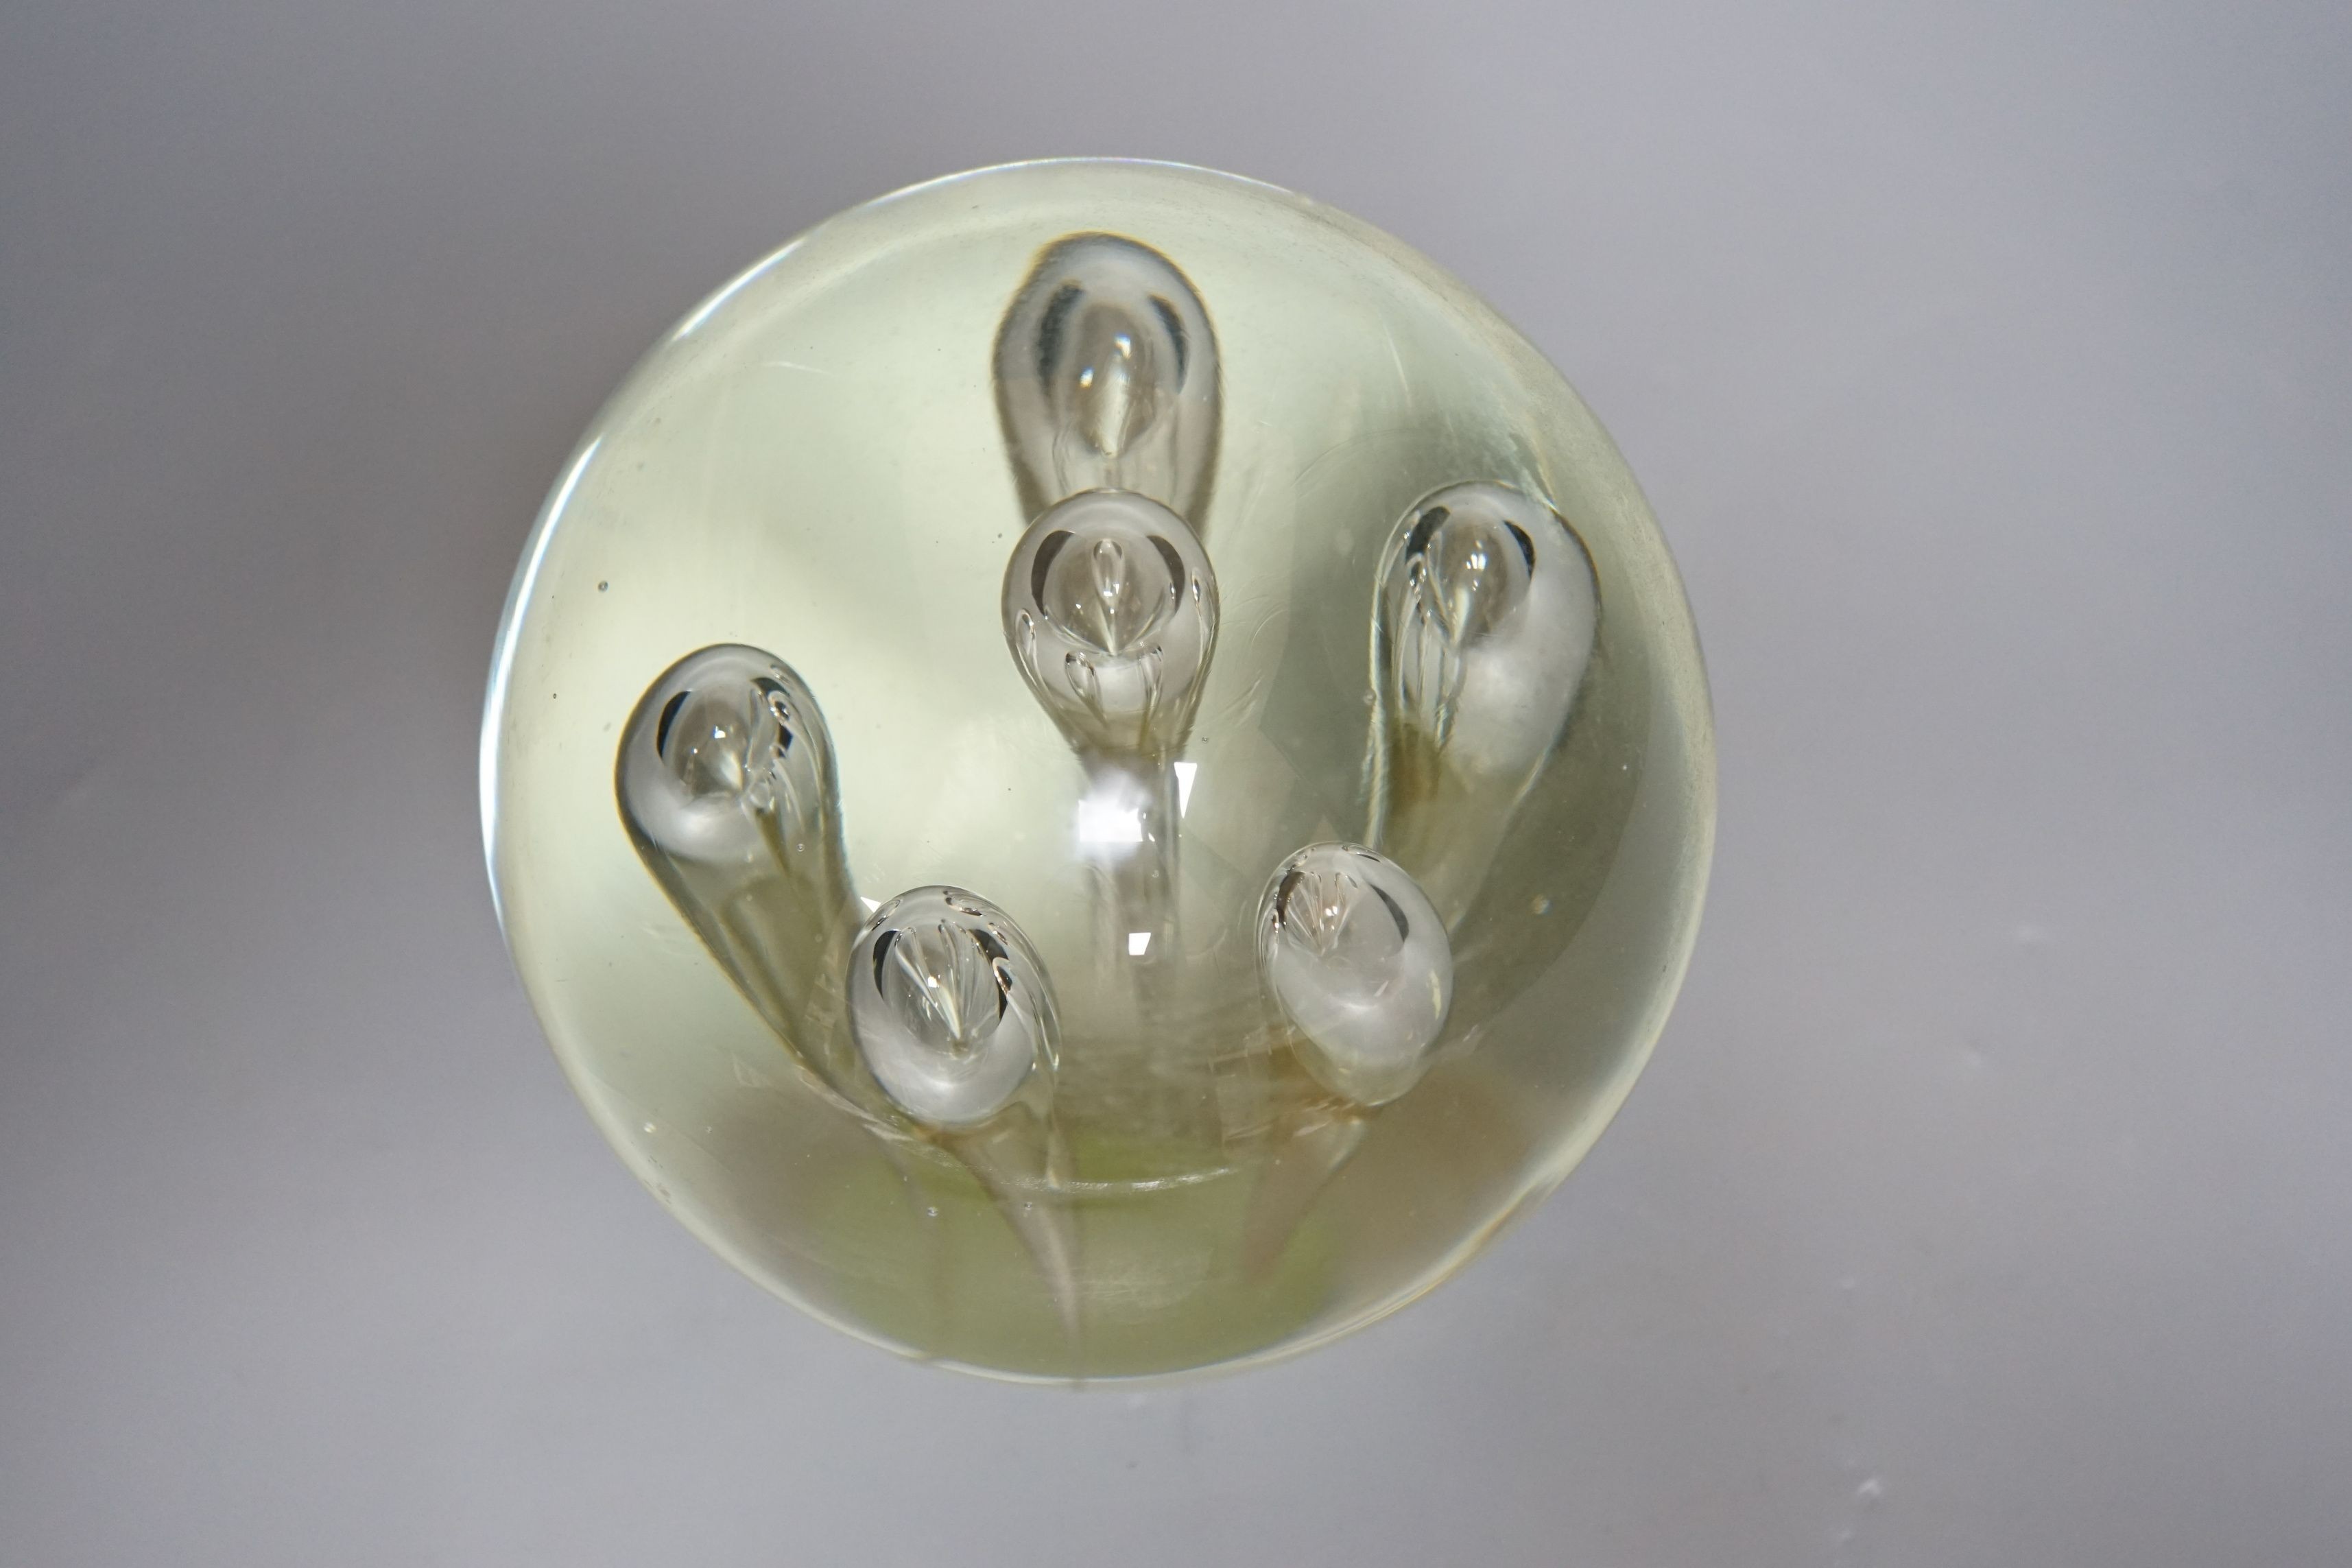 A very large clear glass dump weight, 16cm